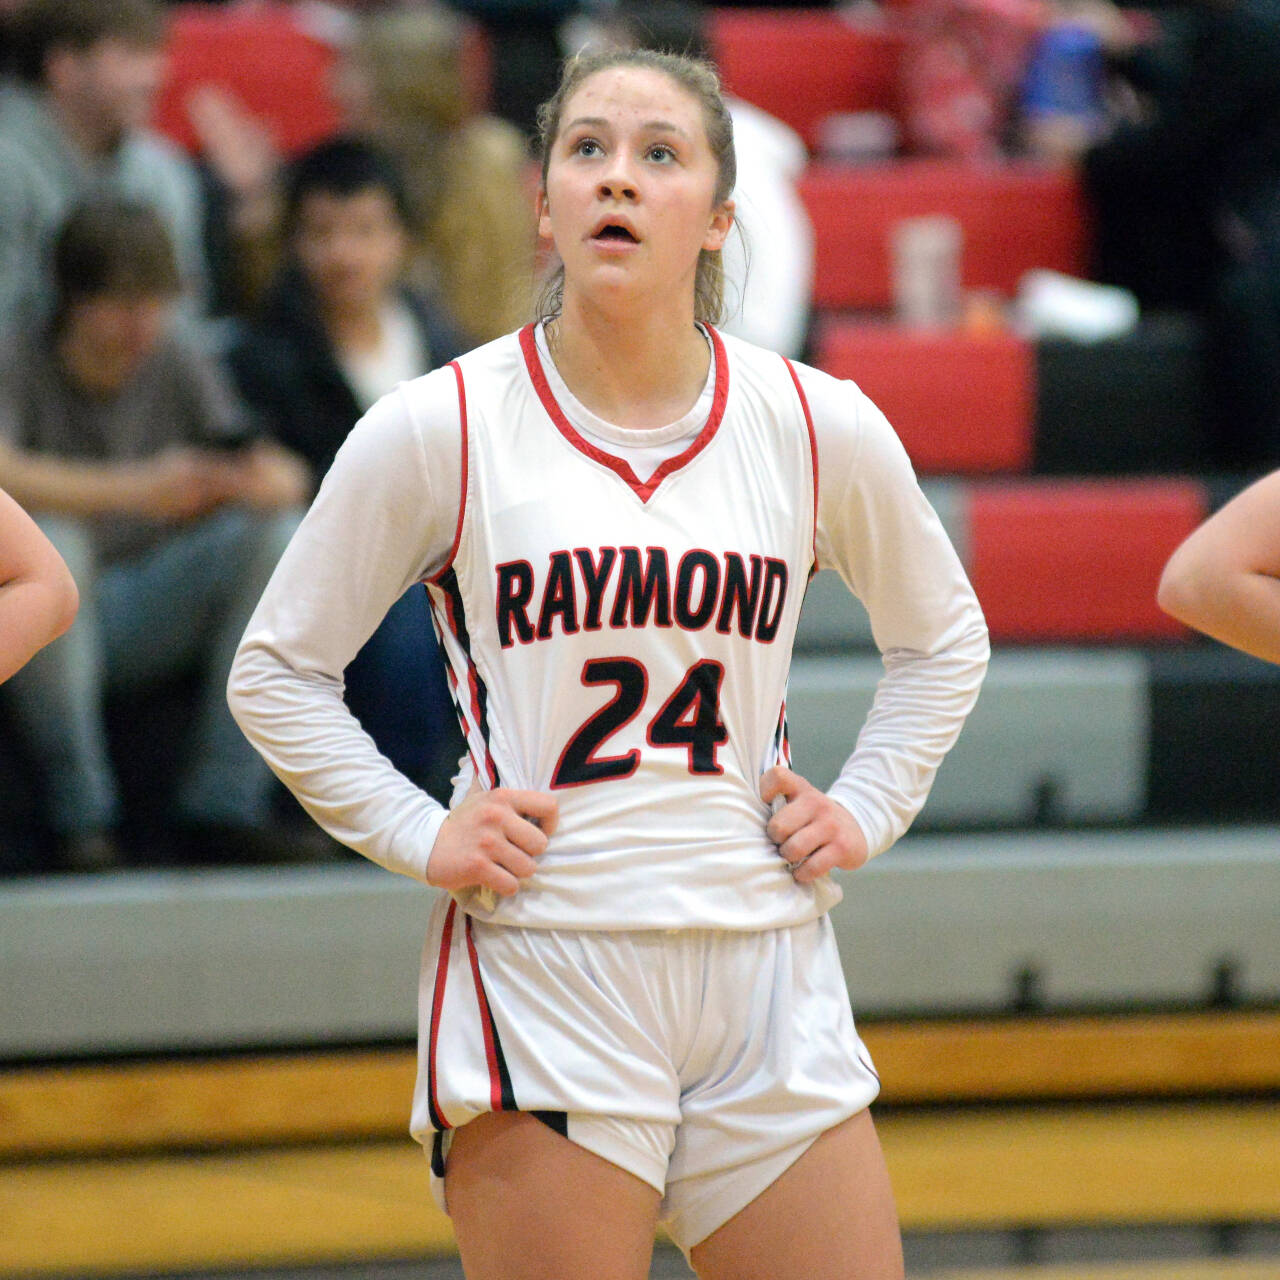 DAILY WORLD FILE PHOTO 
Raymond guard Karsyn Freeman scored 23 points and grabbed 10 rebounds in a 69-17 win over North Beach on Wednesday in Raymond.